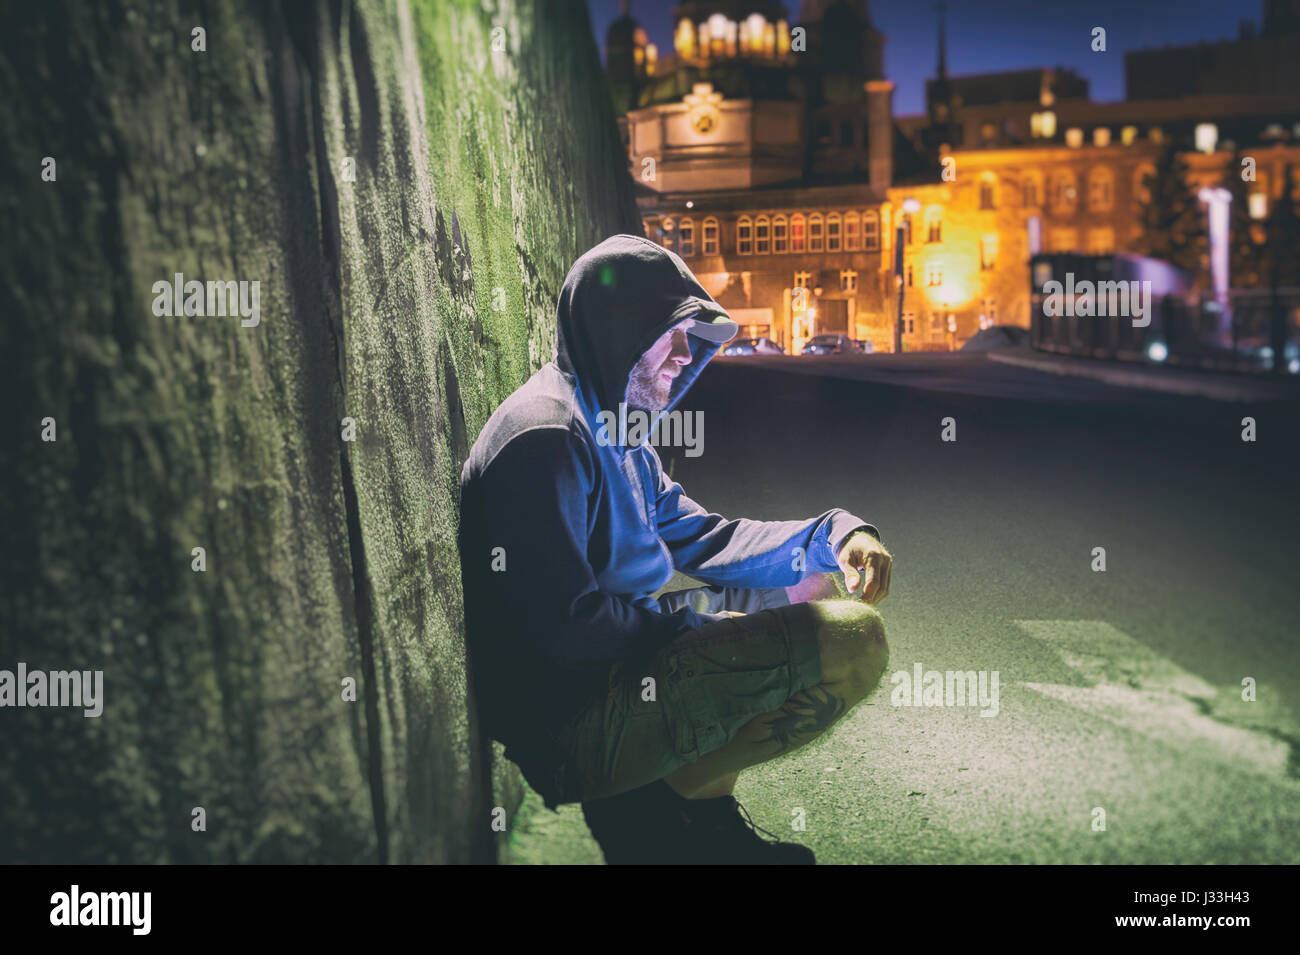 Sad and lonely man with hoodie sitting against a wall at night Stock Photo